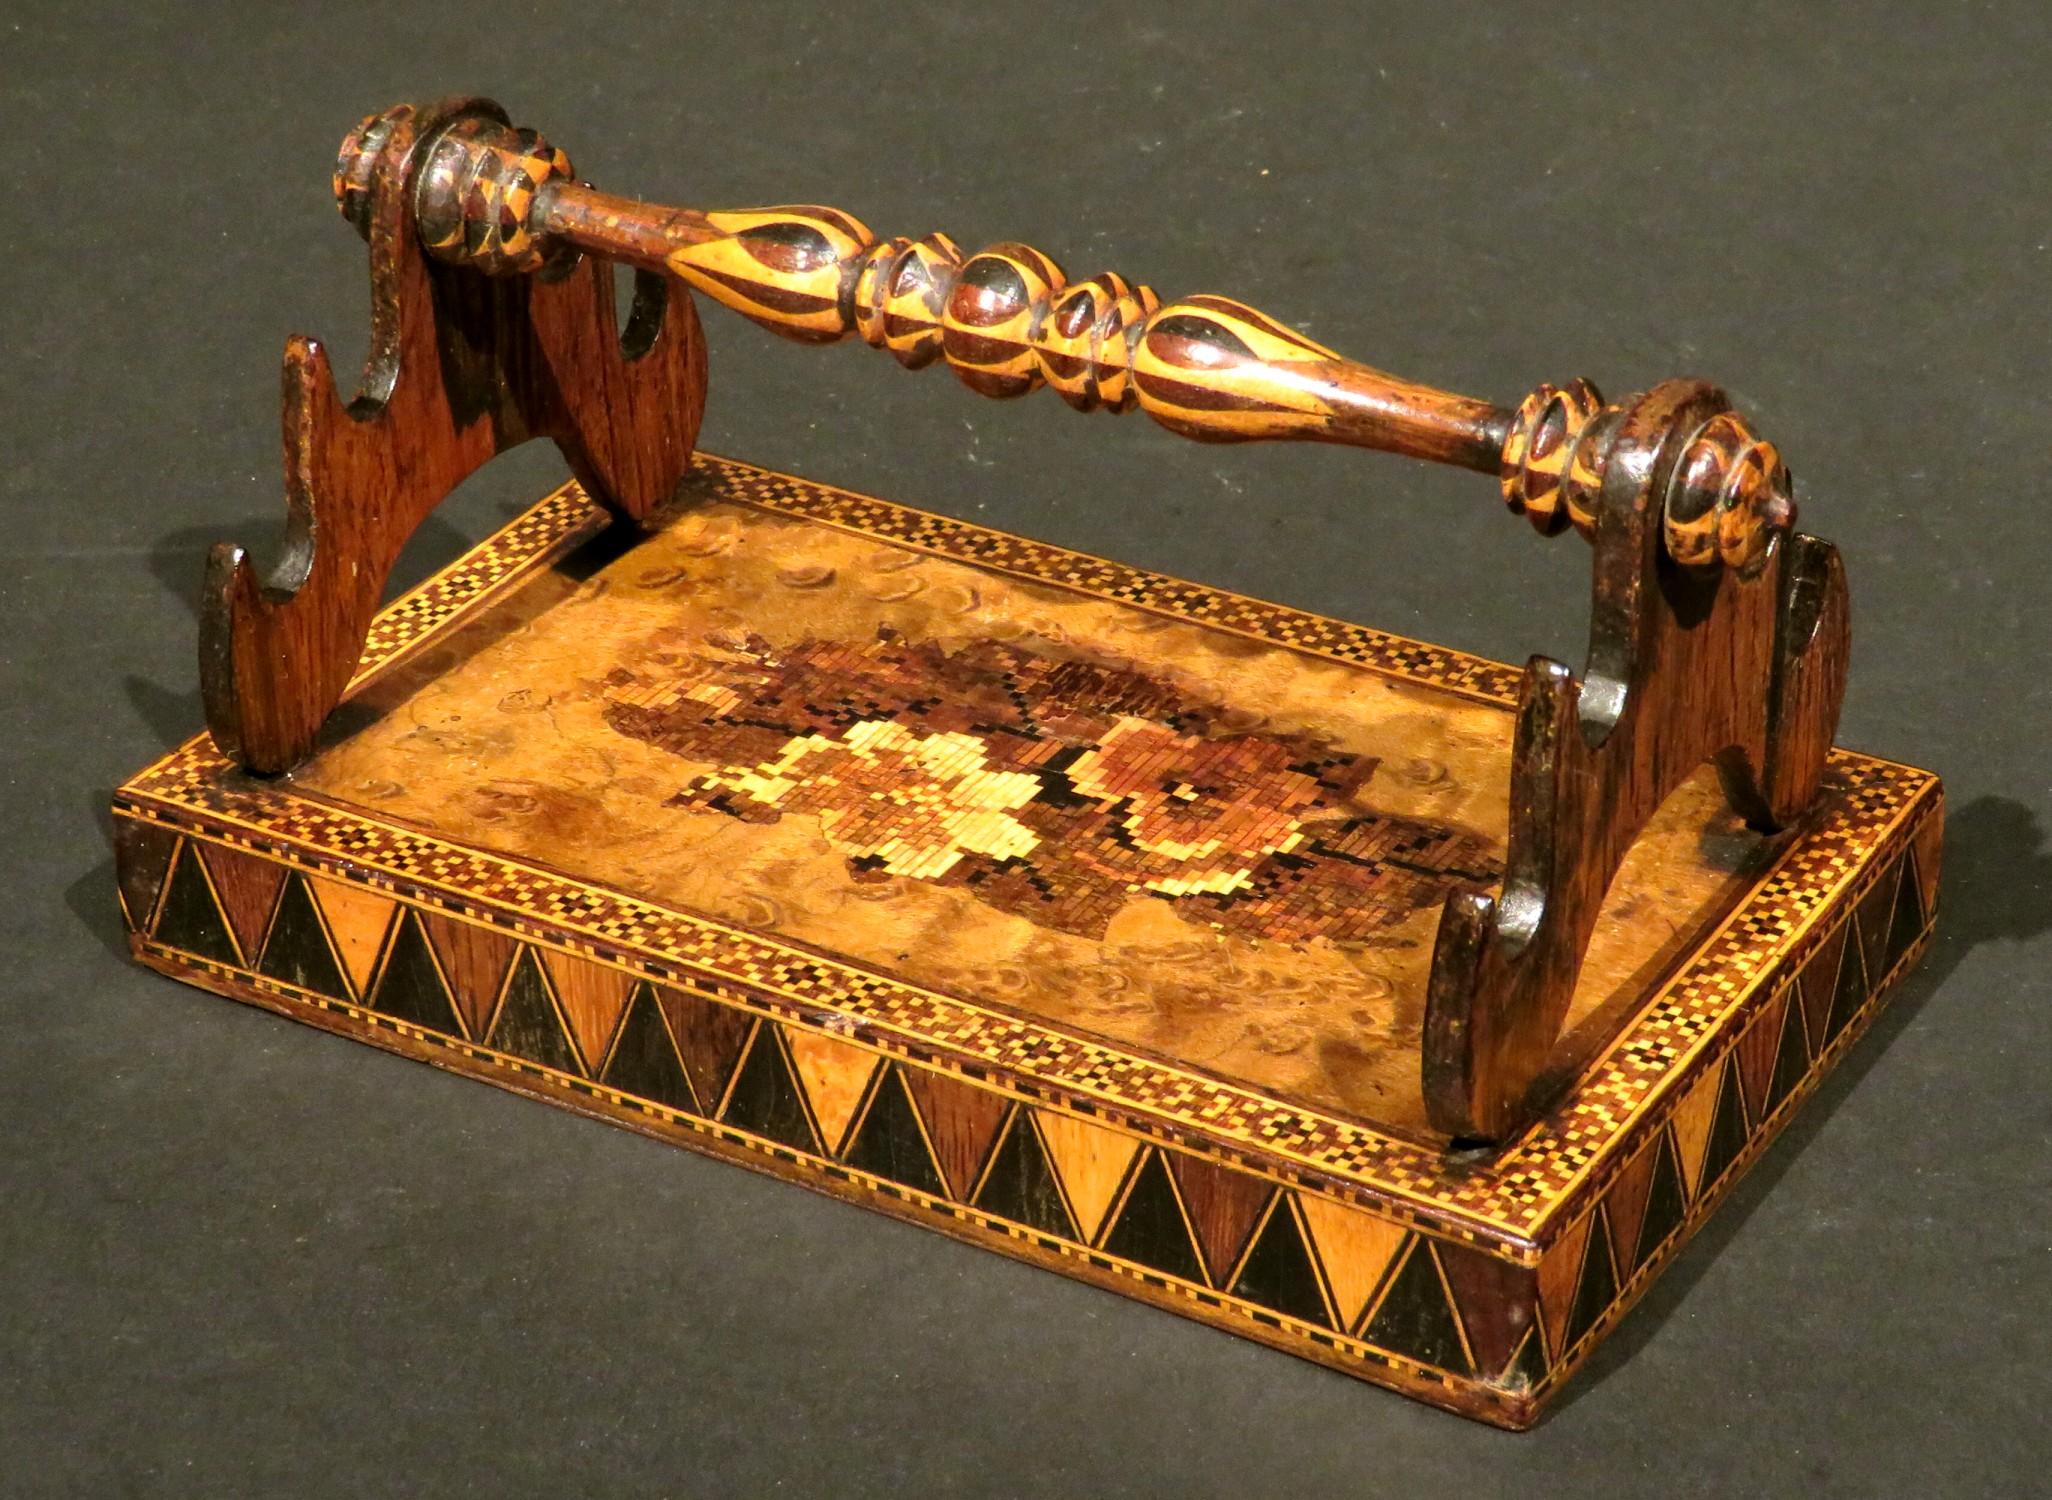 Showing a finely turned fruitwood-handle / pen-rest, affixed to a weighted burl wood base decorated with geometric and floral motifs in stick-work and tessellated mosaics, the sides decorated with geometric inlays of contrasting light and dark woods.